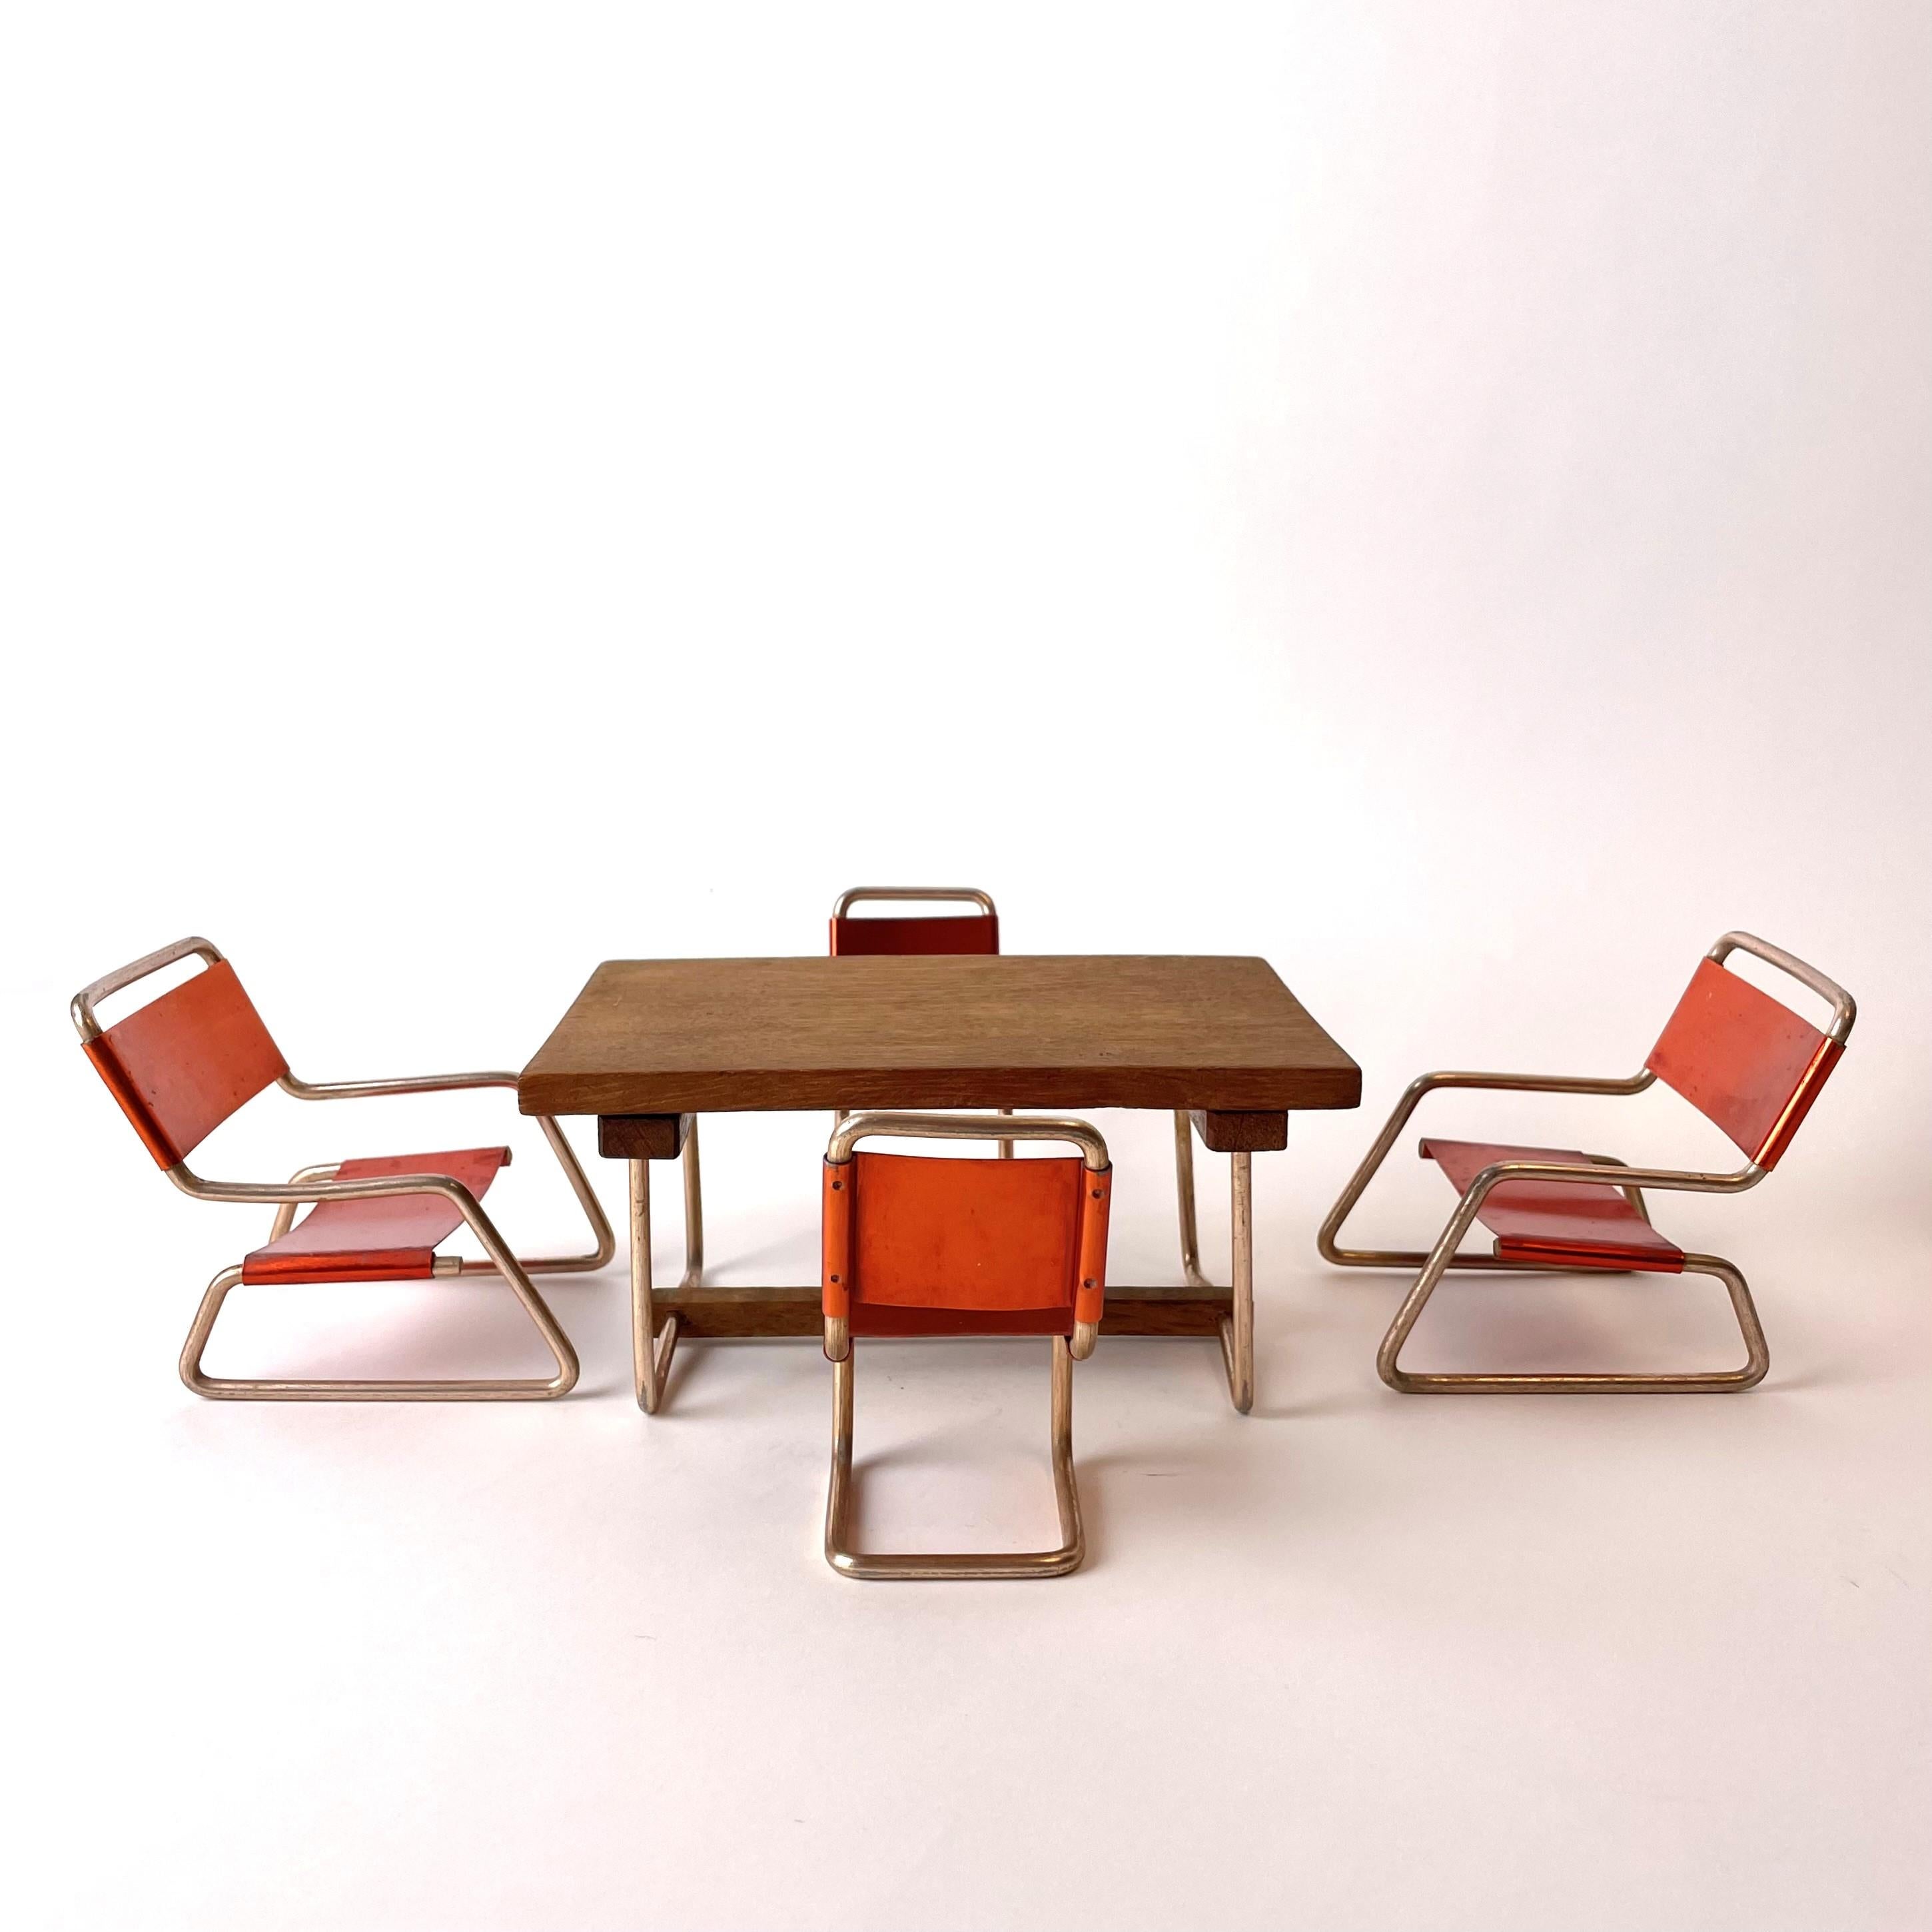 Charming miniature seating group in aluminium and with a table top in teak. Manufactured during the 1930s-1940s in period-typical Bauhaus style.

Measure: The whole group, arranged like in photos, about 42cm*28cm*10cm.
Table: